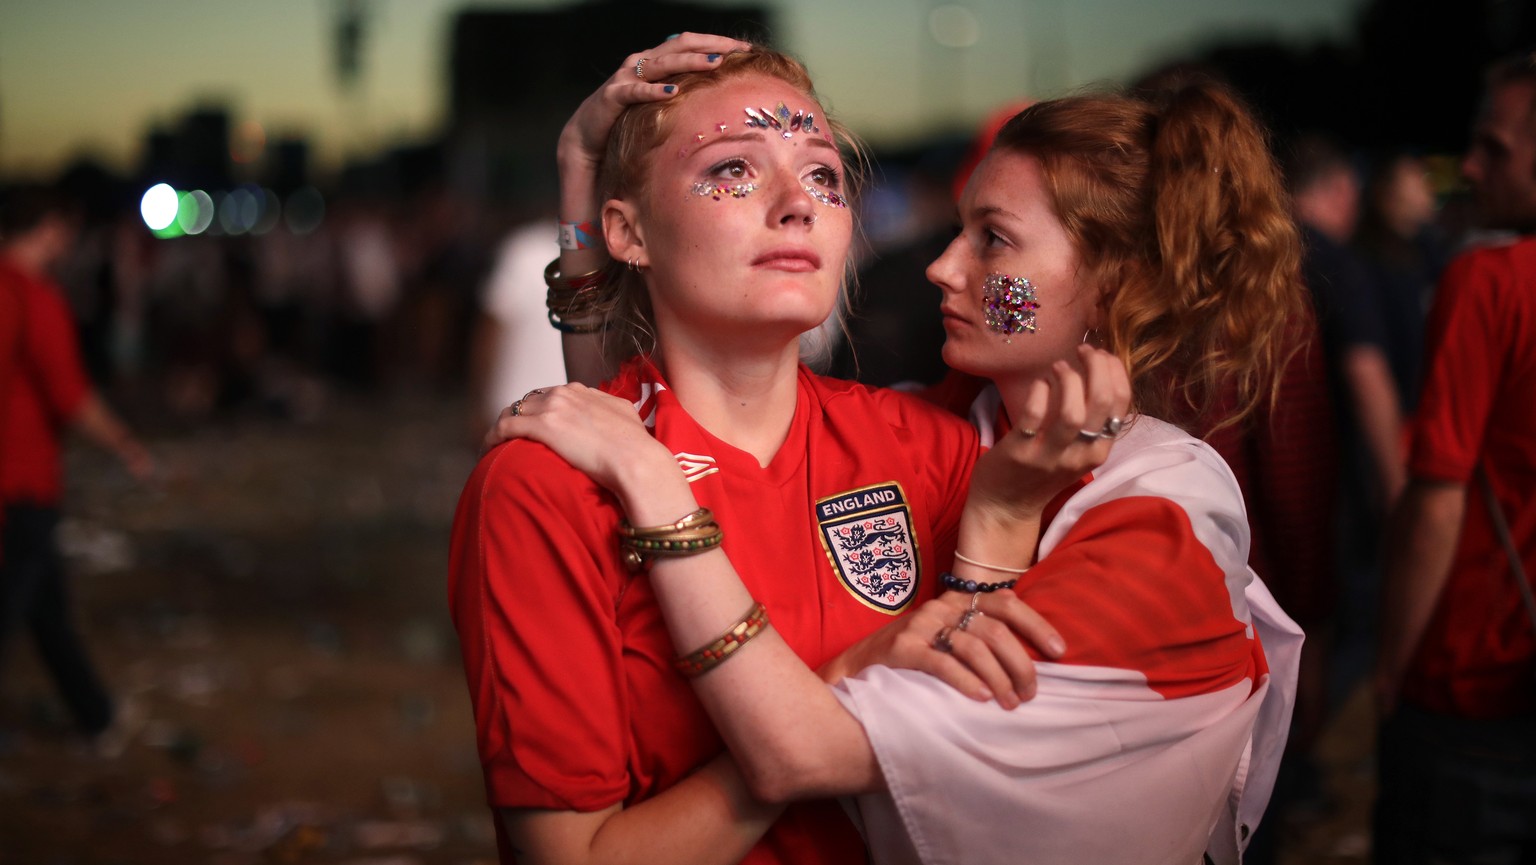 England soccer fans react after England national soccer team lost the semifinal match between Croatia and England at the 2018 soccer World Cup, in Hyde Park, London, Wednesday, July 11, 2018. (AP Phot ...